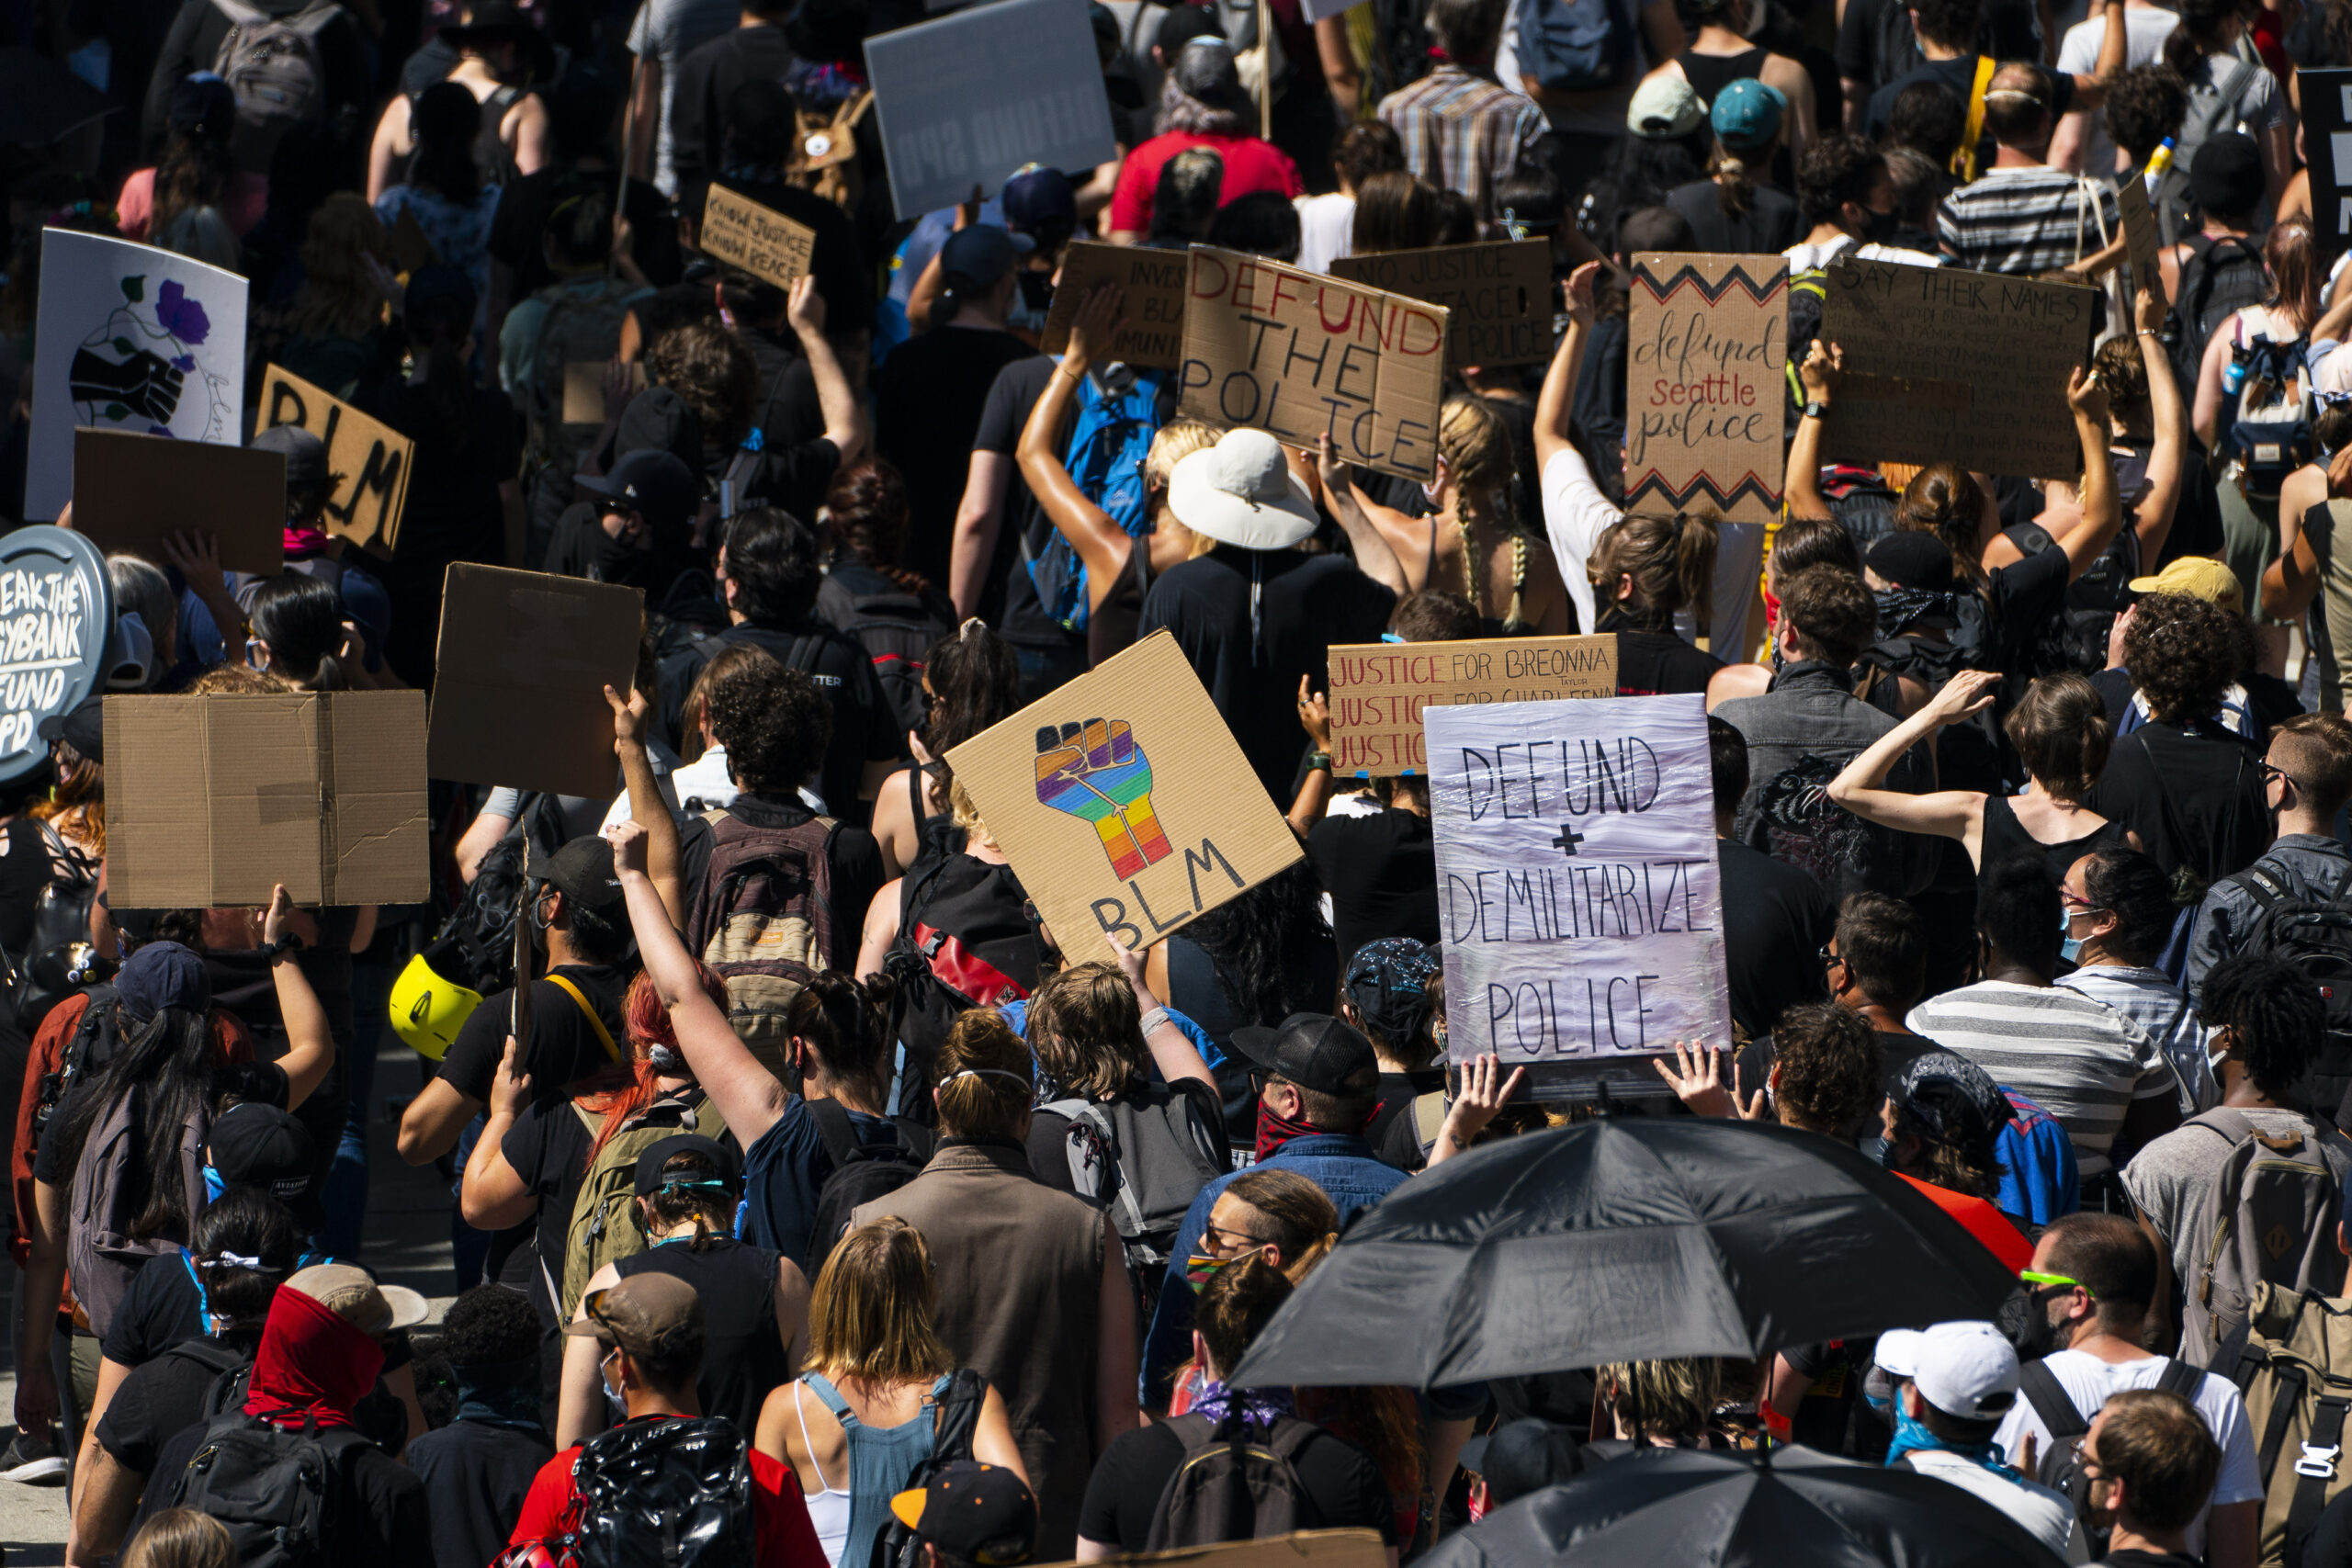 Protesters march to City Hall in support of defunding police on August 5, 2020 in Seattle, Washington (David Ryder/Stringer via Getty Images).